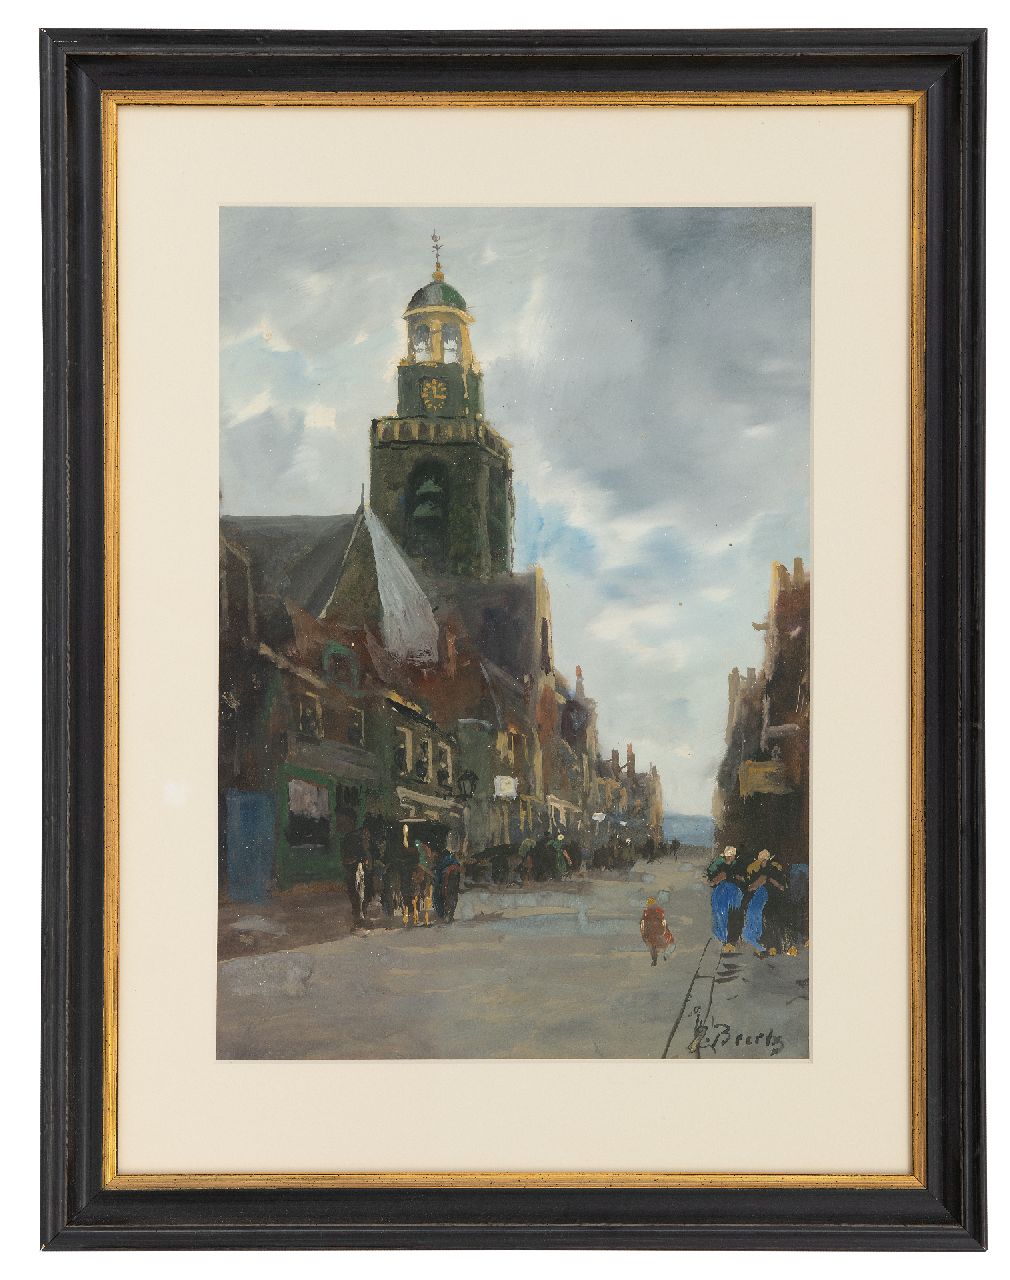 Beertz  J. | J. J. Beertz | Watercolours and drawings offered for sale | A village street, watercolour on paper 38.0 x 26.5 cm, signed l.r.